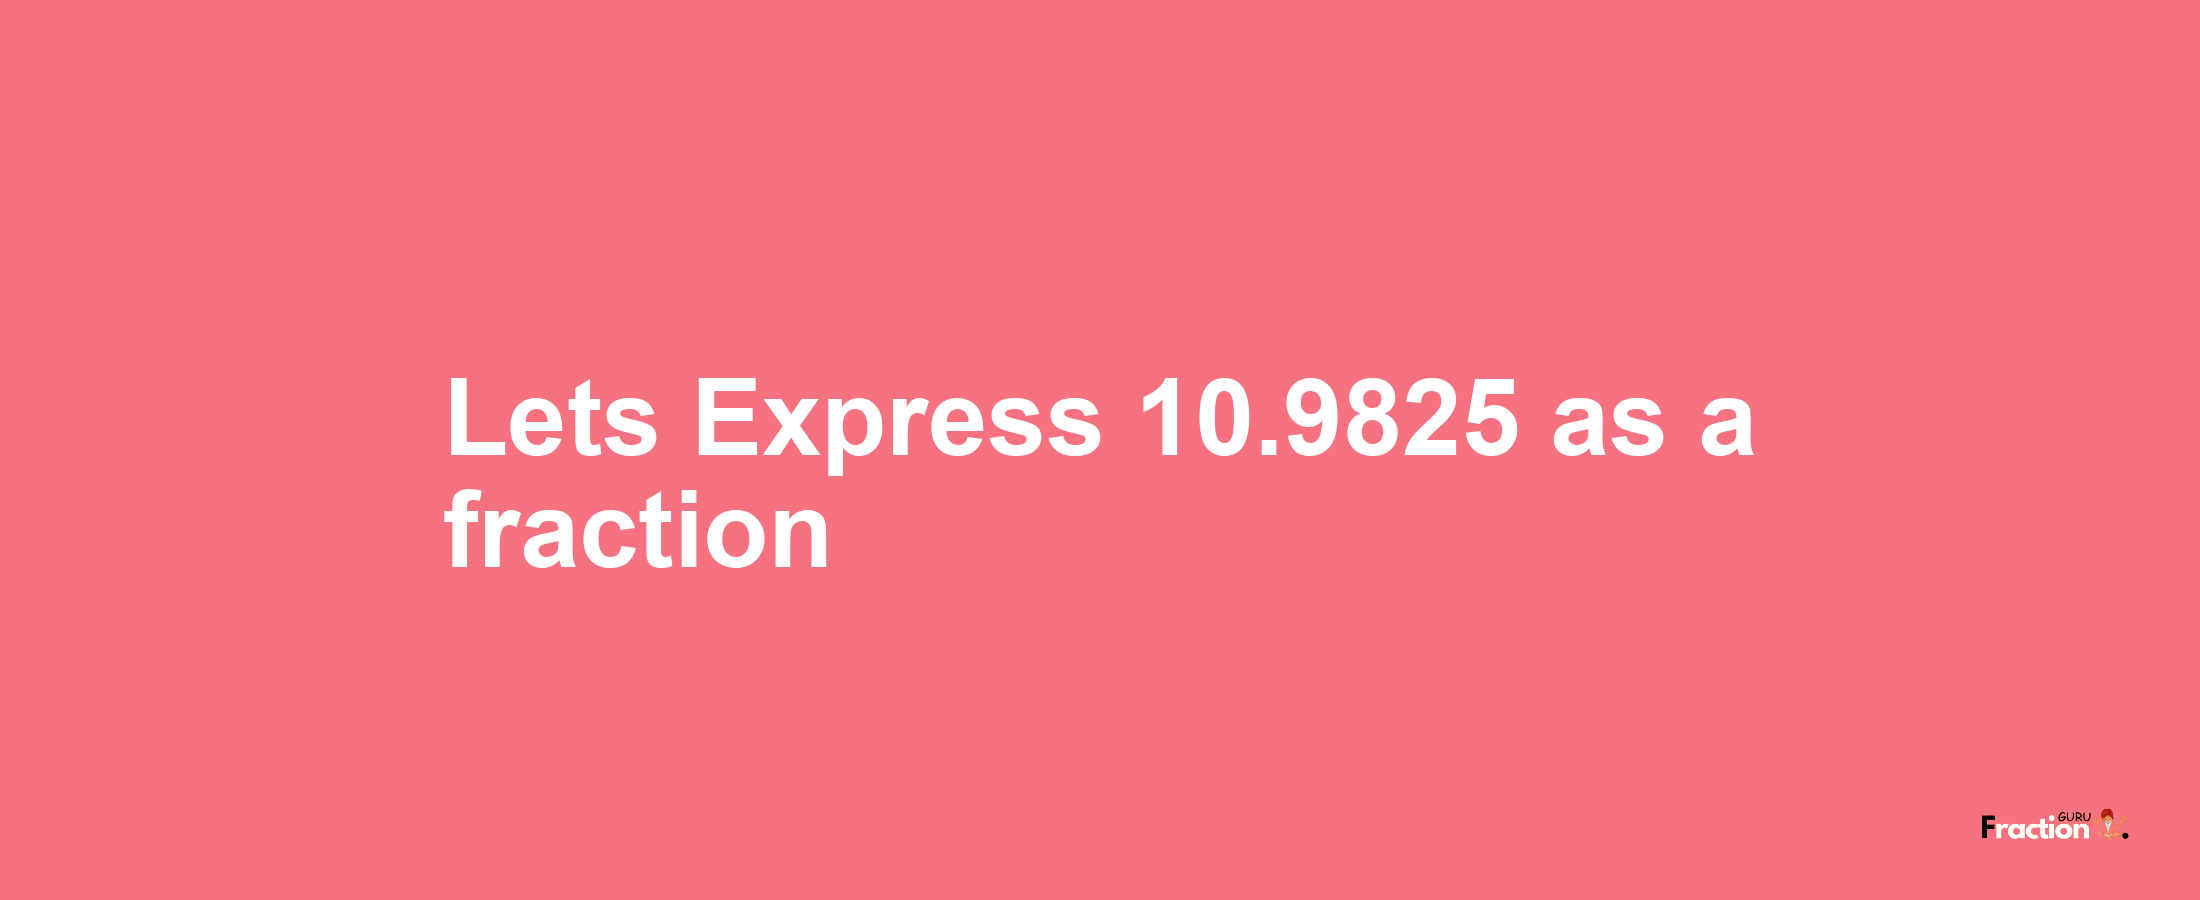 Lets Express 10.9825 as afraction